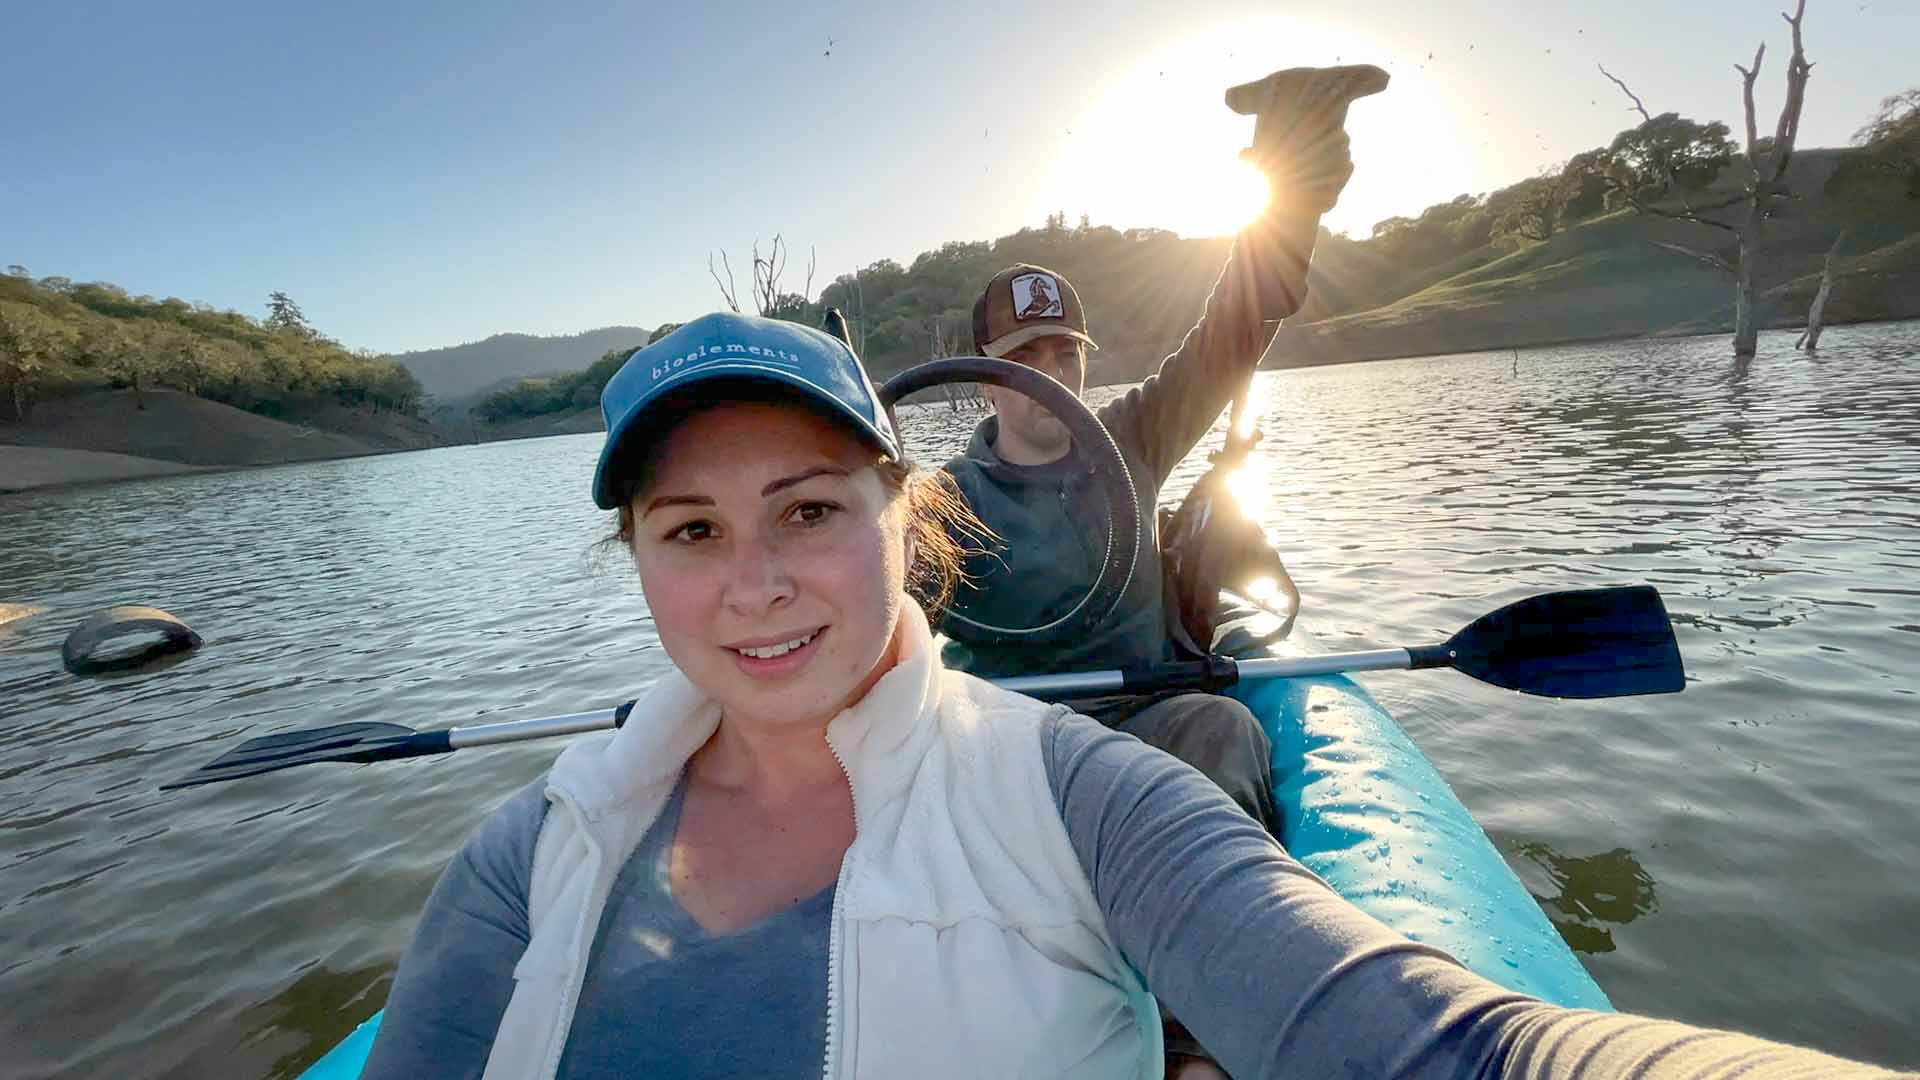 California Vlogger No Chill Mustafa and His Wife on a Raft in Lake Sonoma